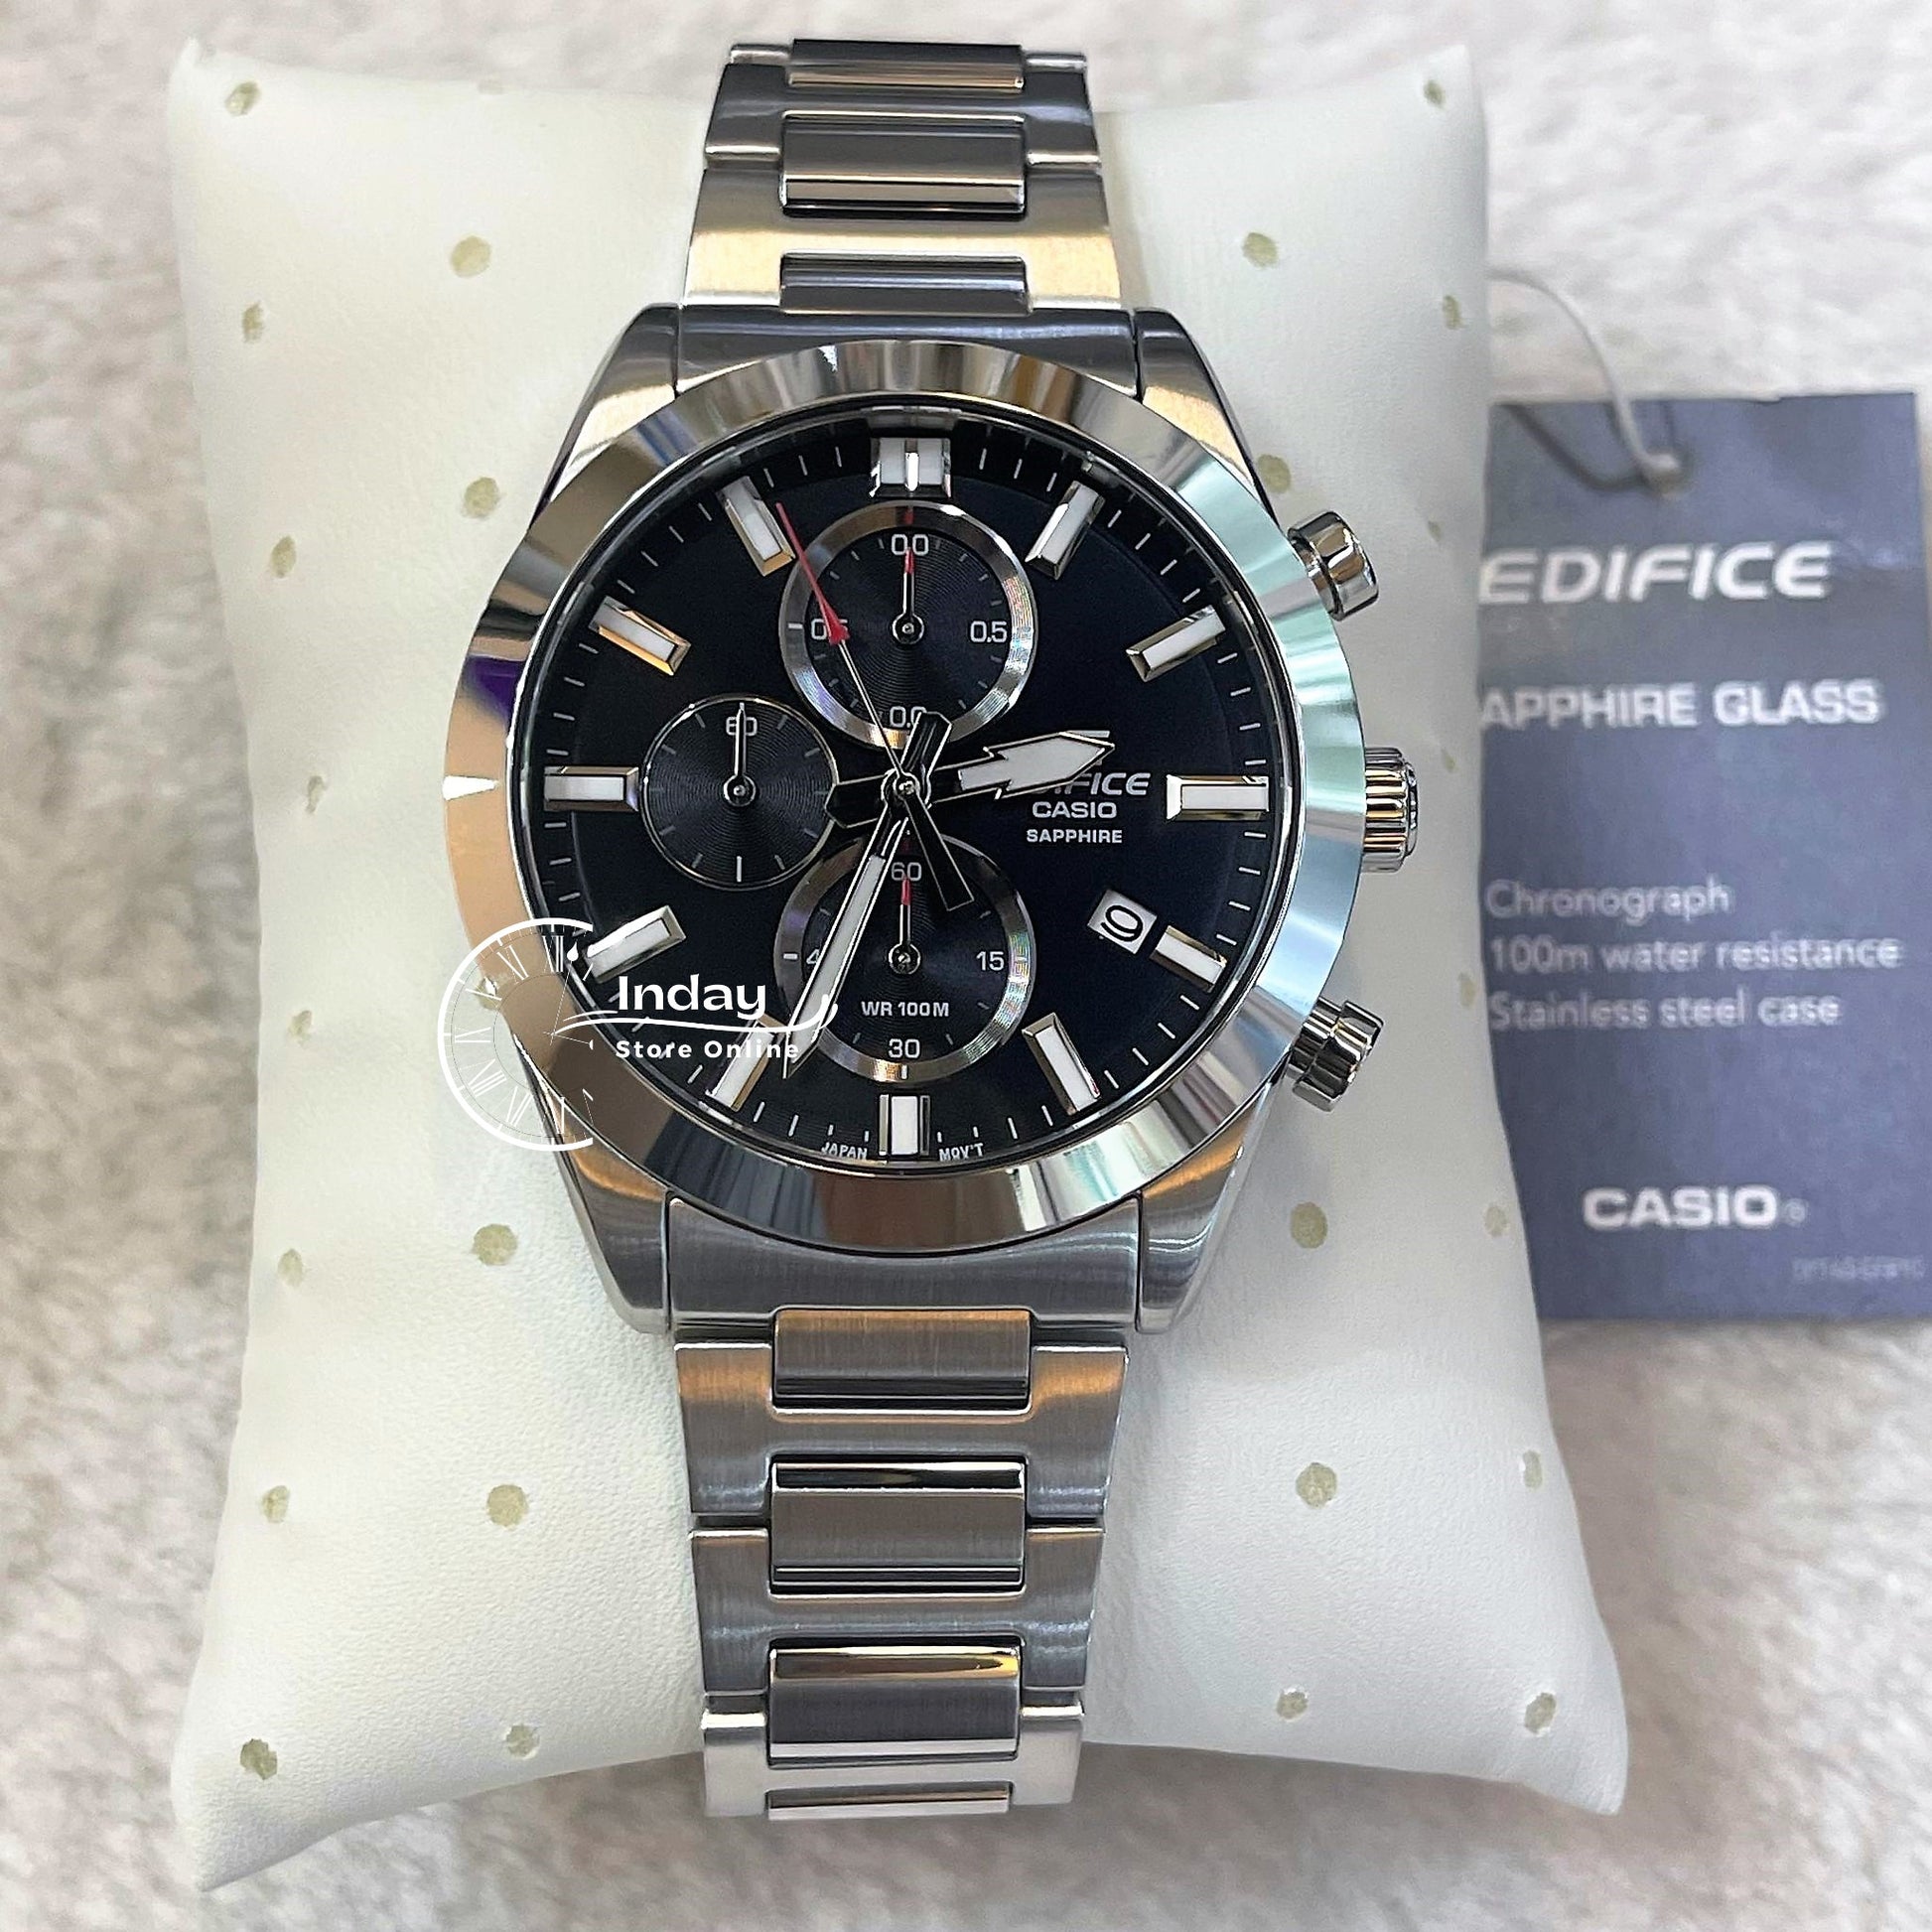 Casio Edifice Men's Watch EFB-710D-1A – indaystoreonline